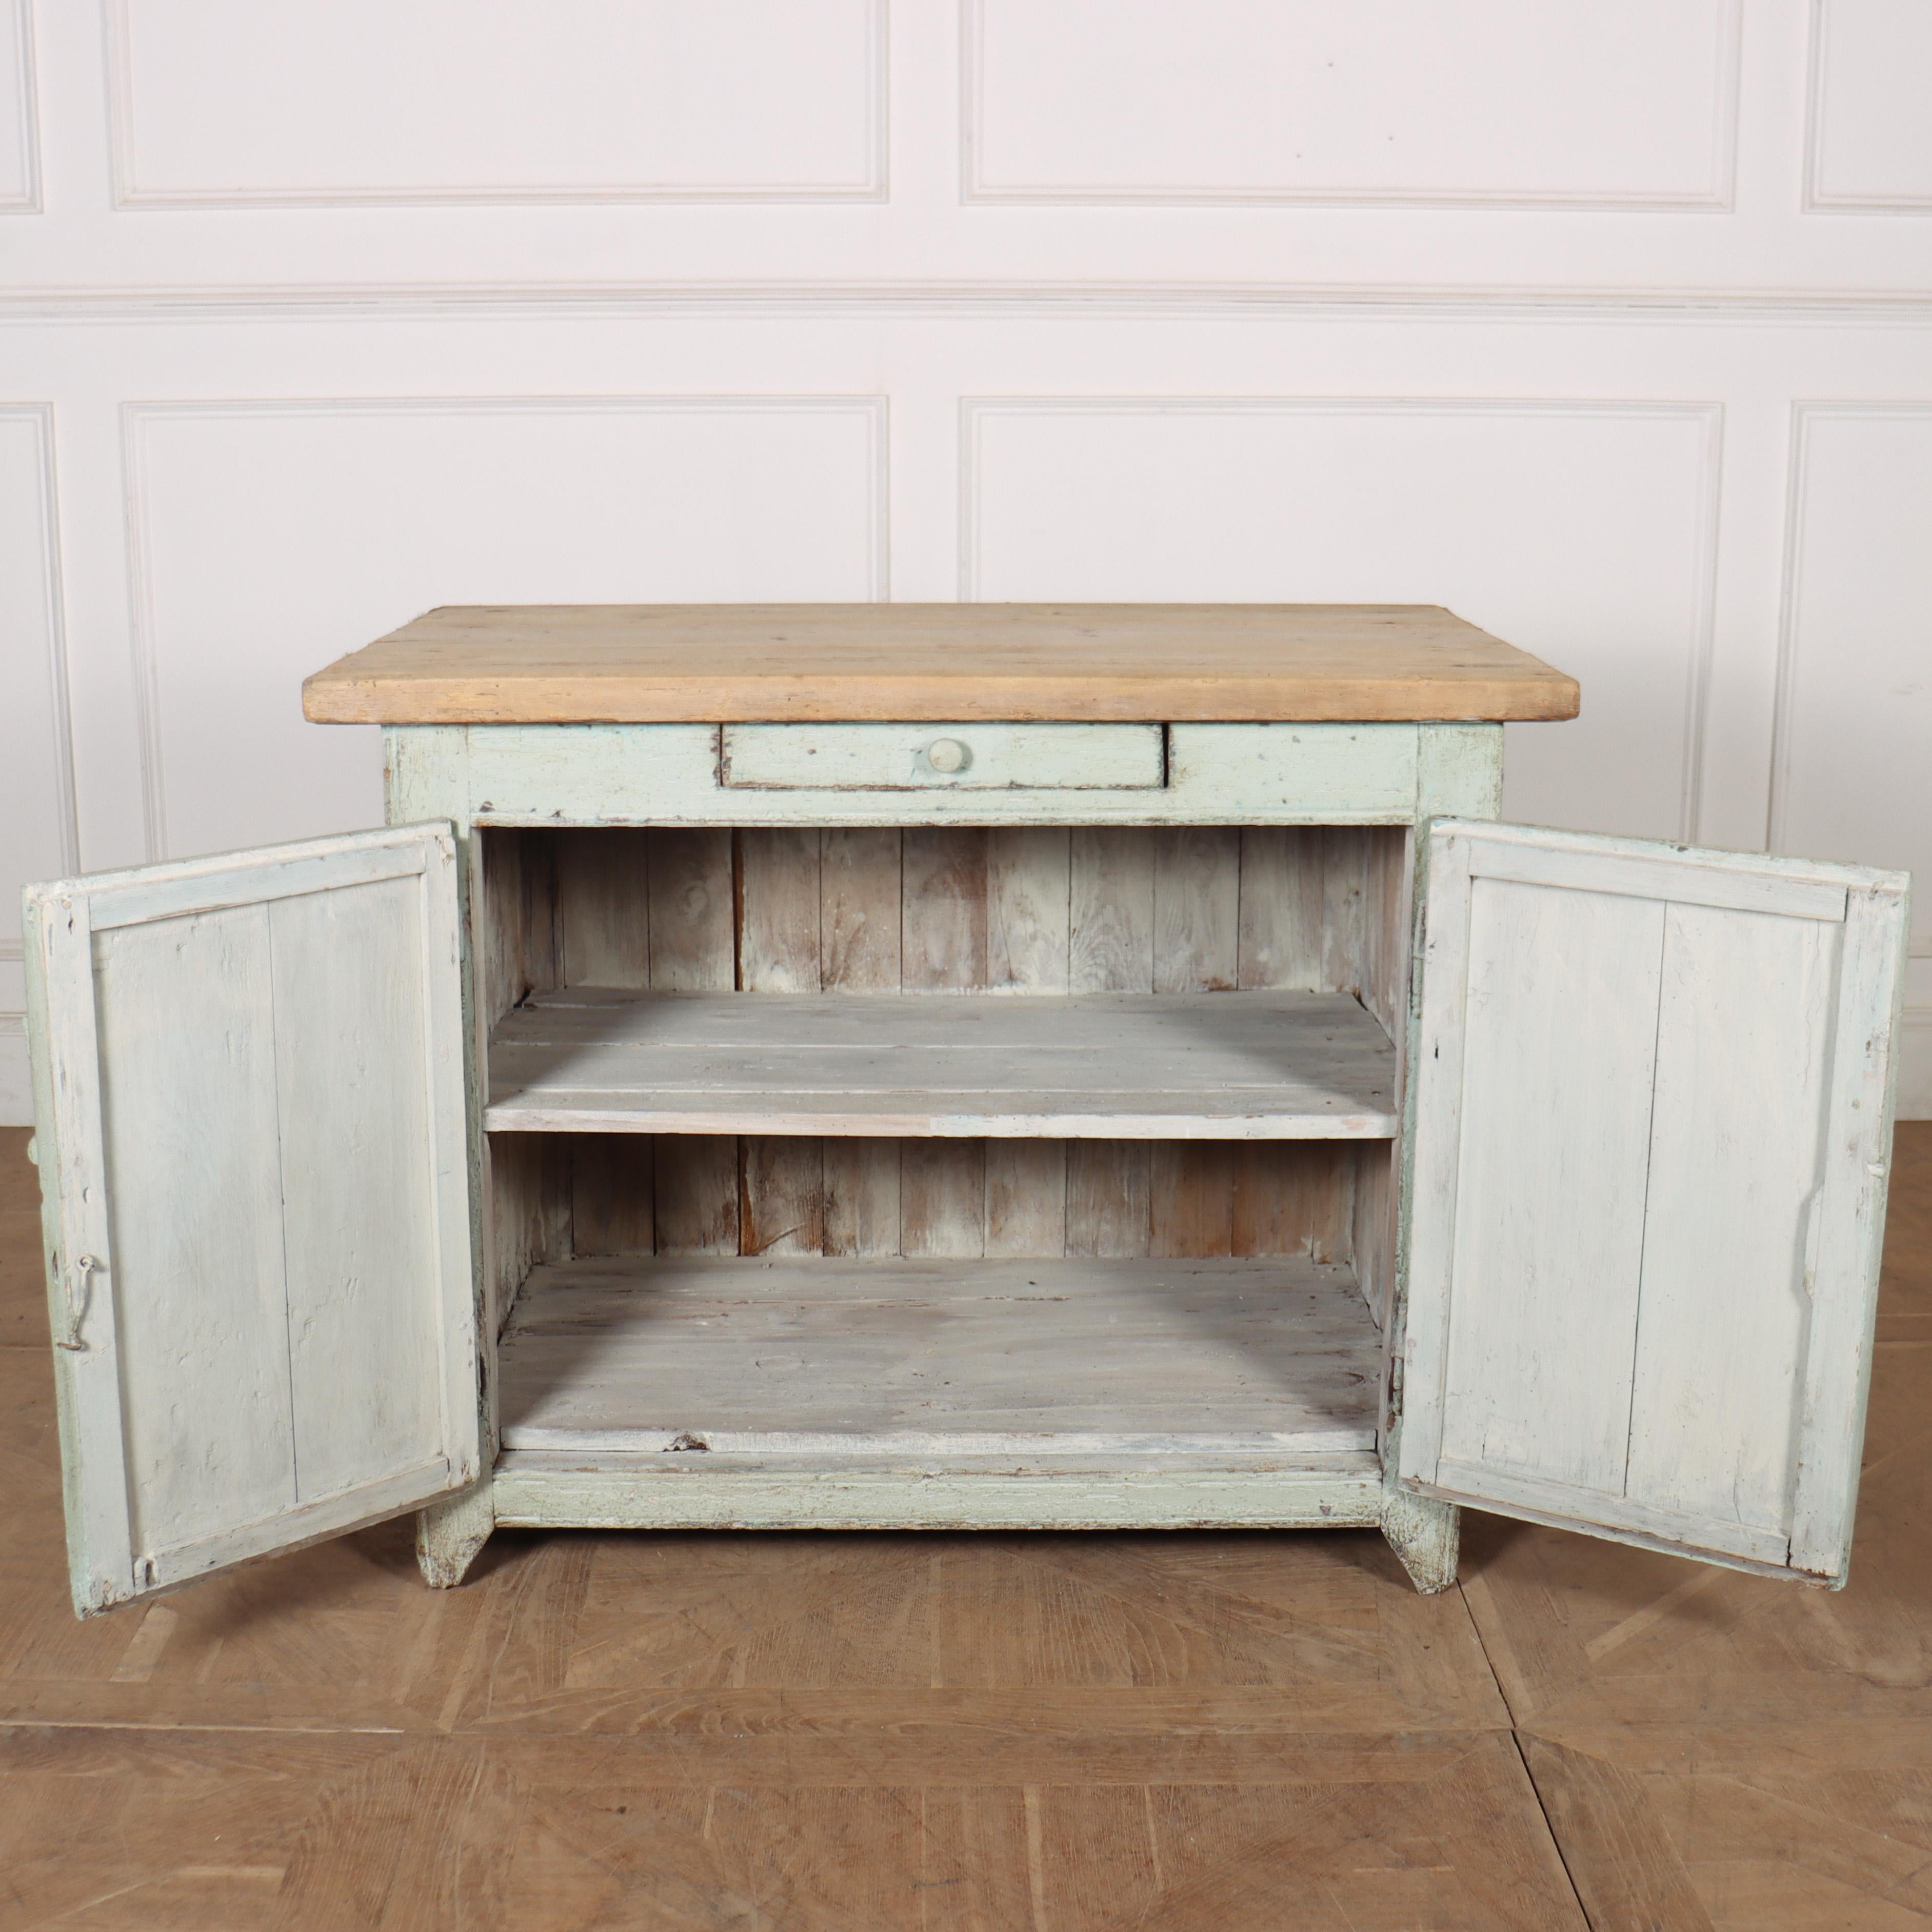 Small Painted Kitchen Island In Good Condition For Sale In Leamington Spa, Warwickshire